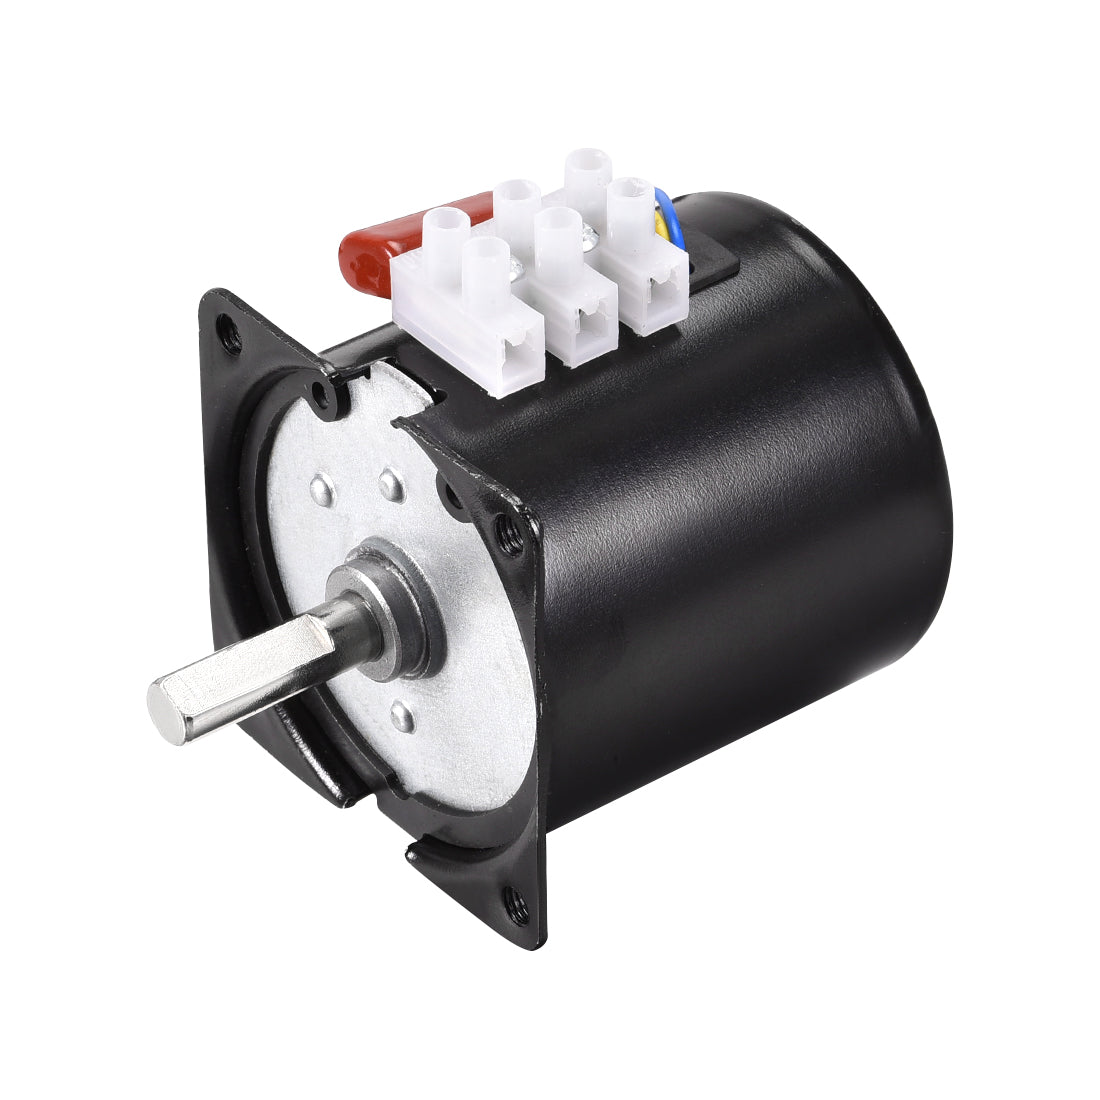 uxcell Uxcell AC 220V Electric Synchronous Motor Metal Gear Turntable /C 40RPM 50-60HZ 14W 8mm Dia Central Shaft